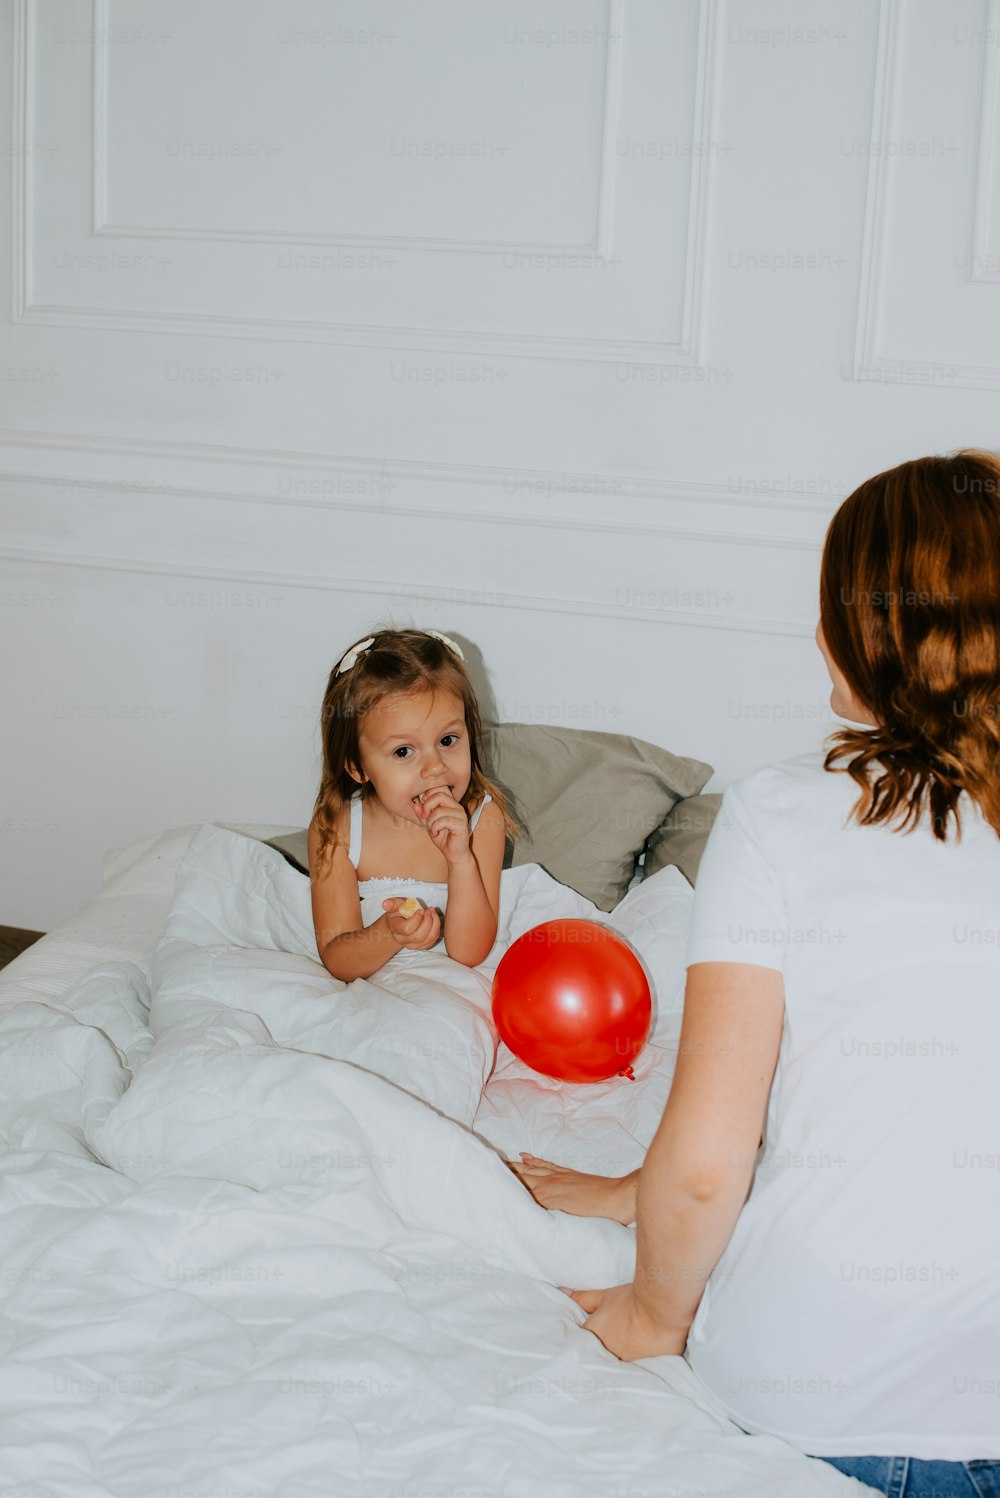 a woman holding a red balloon sitting on top of a bed